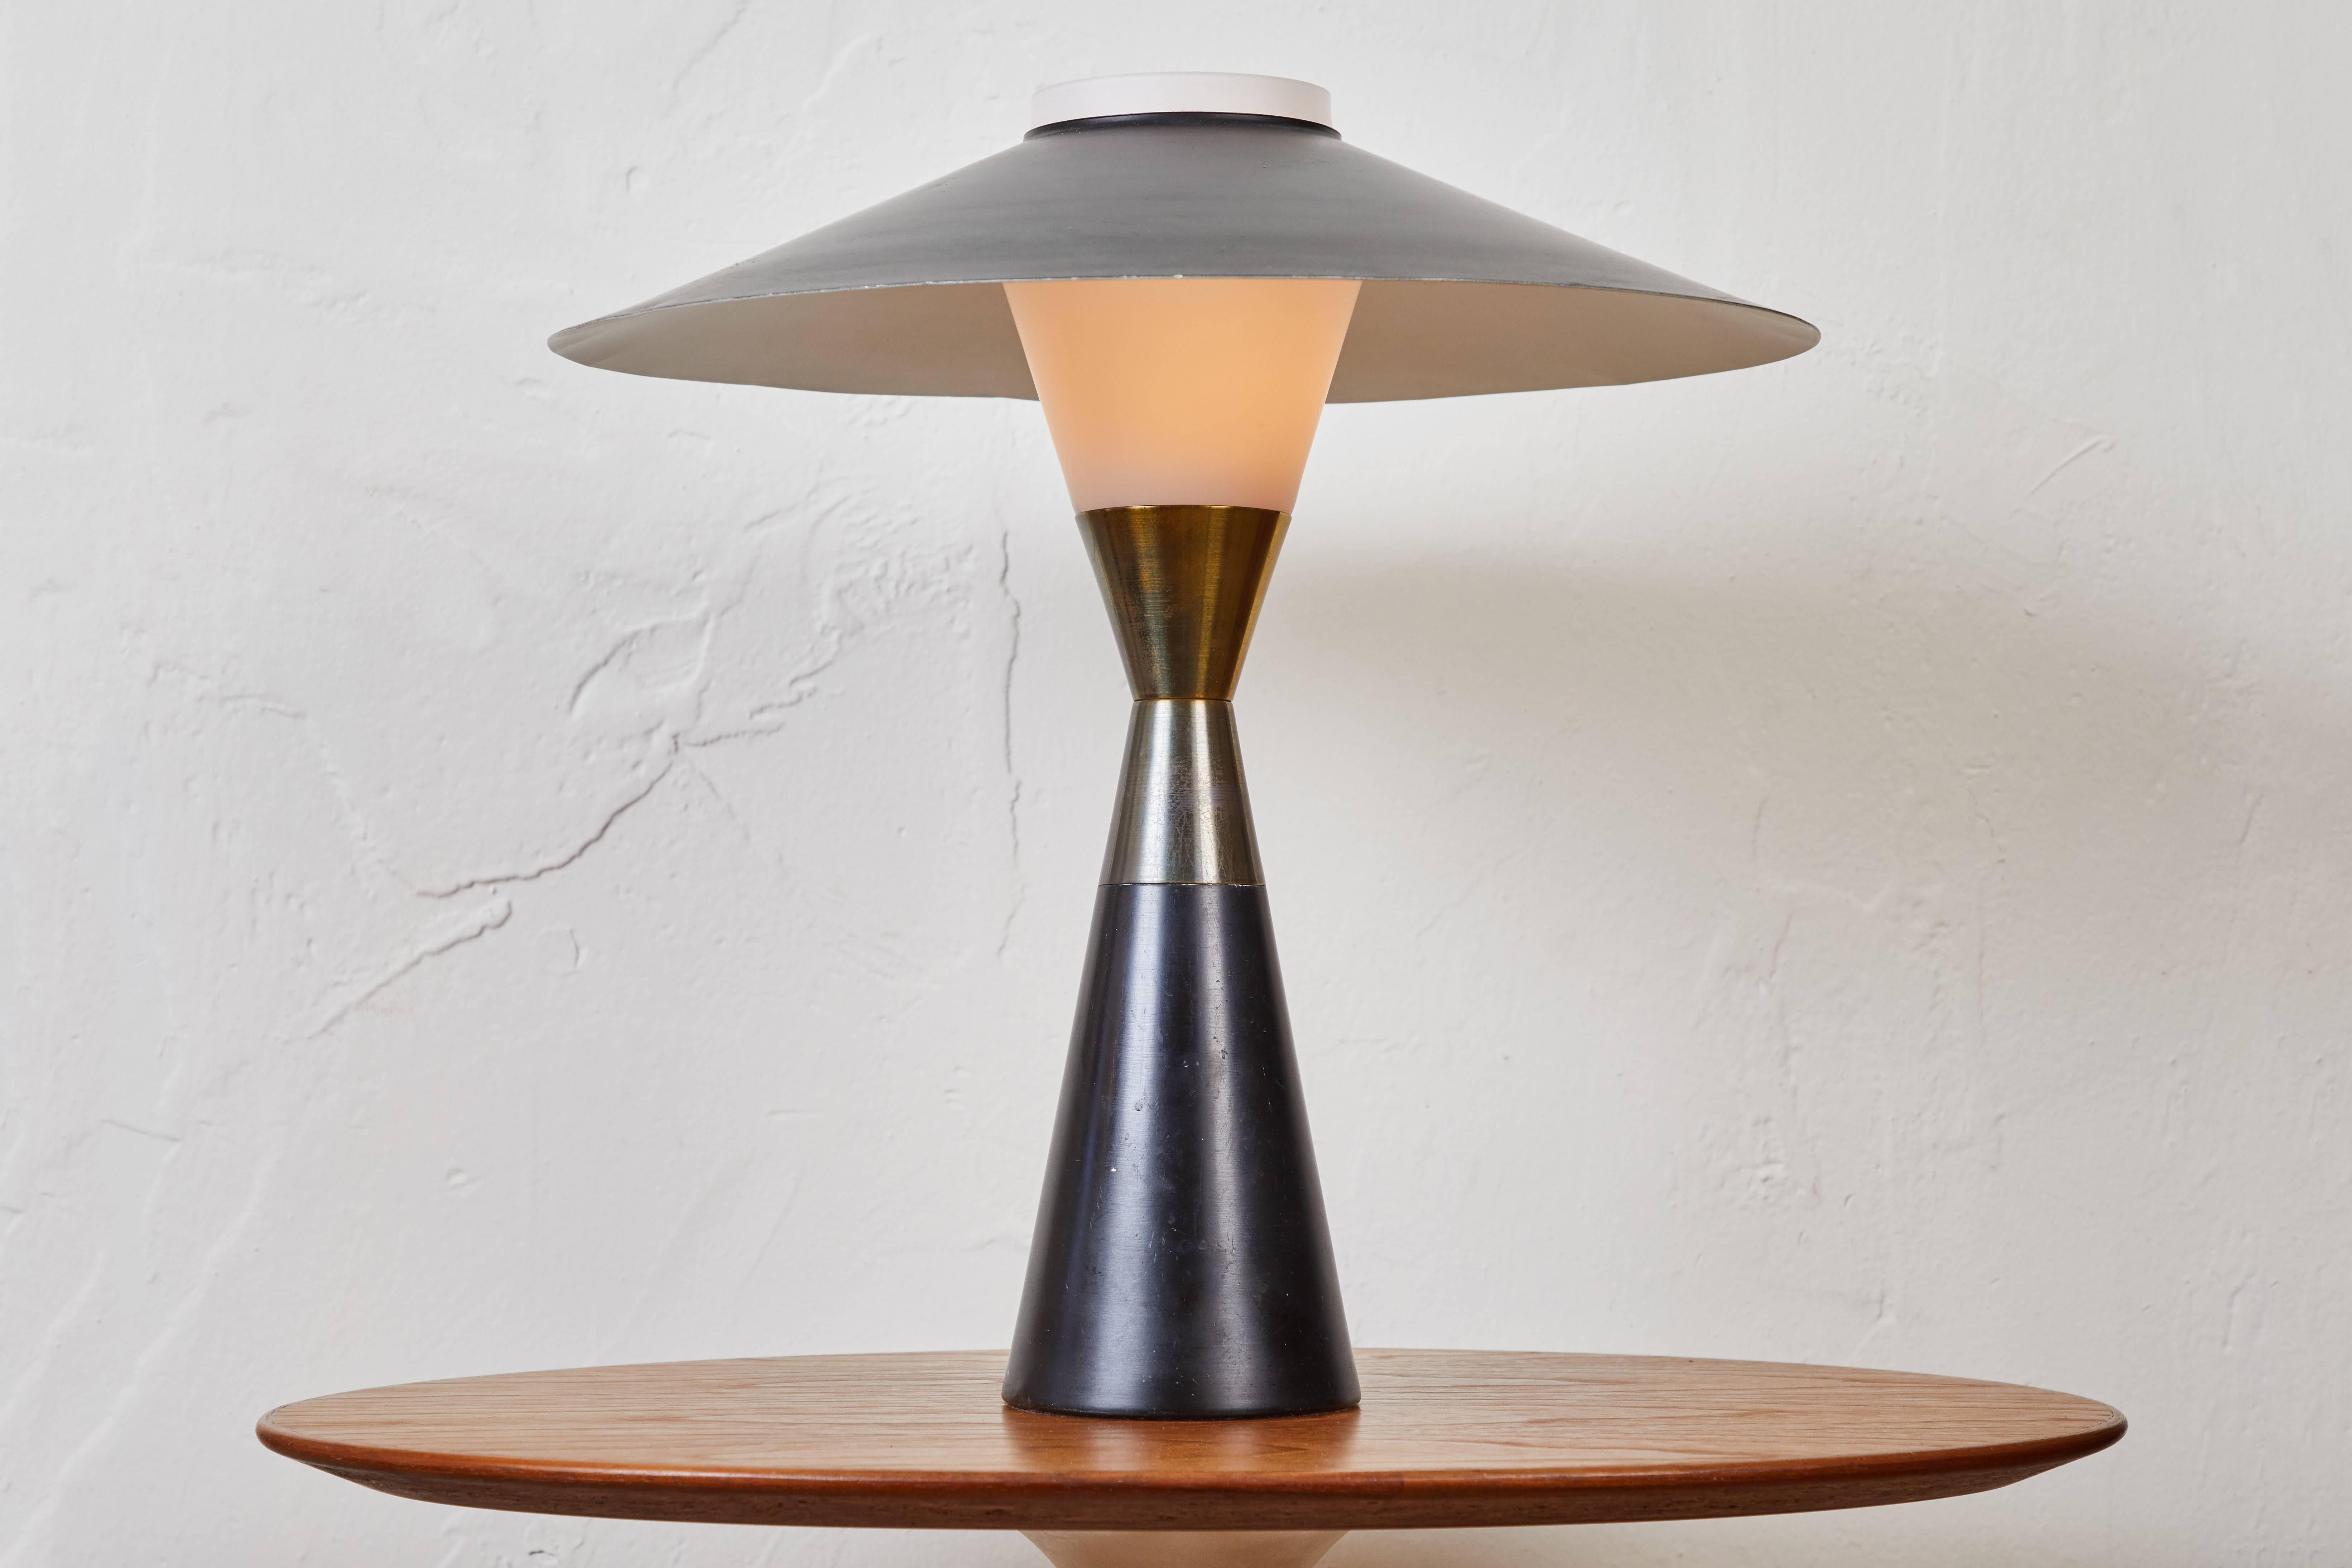 1950s Stilnovo table lamp. Executed in opaline matte glass, patinated brass and black painted metal with delicately shaped shade that rests on the glass. A sculptural and refined set of sconces characteristic of 1960s Italian design at its highest